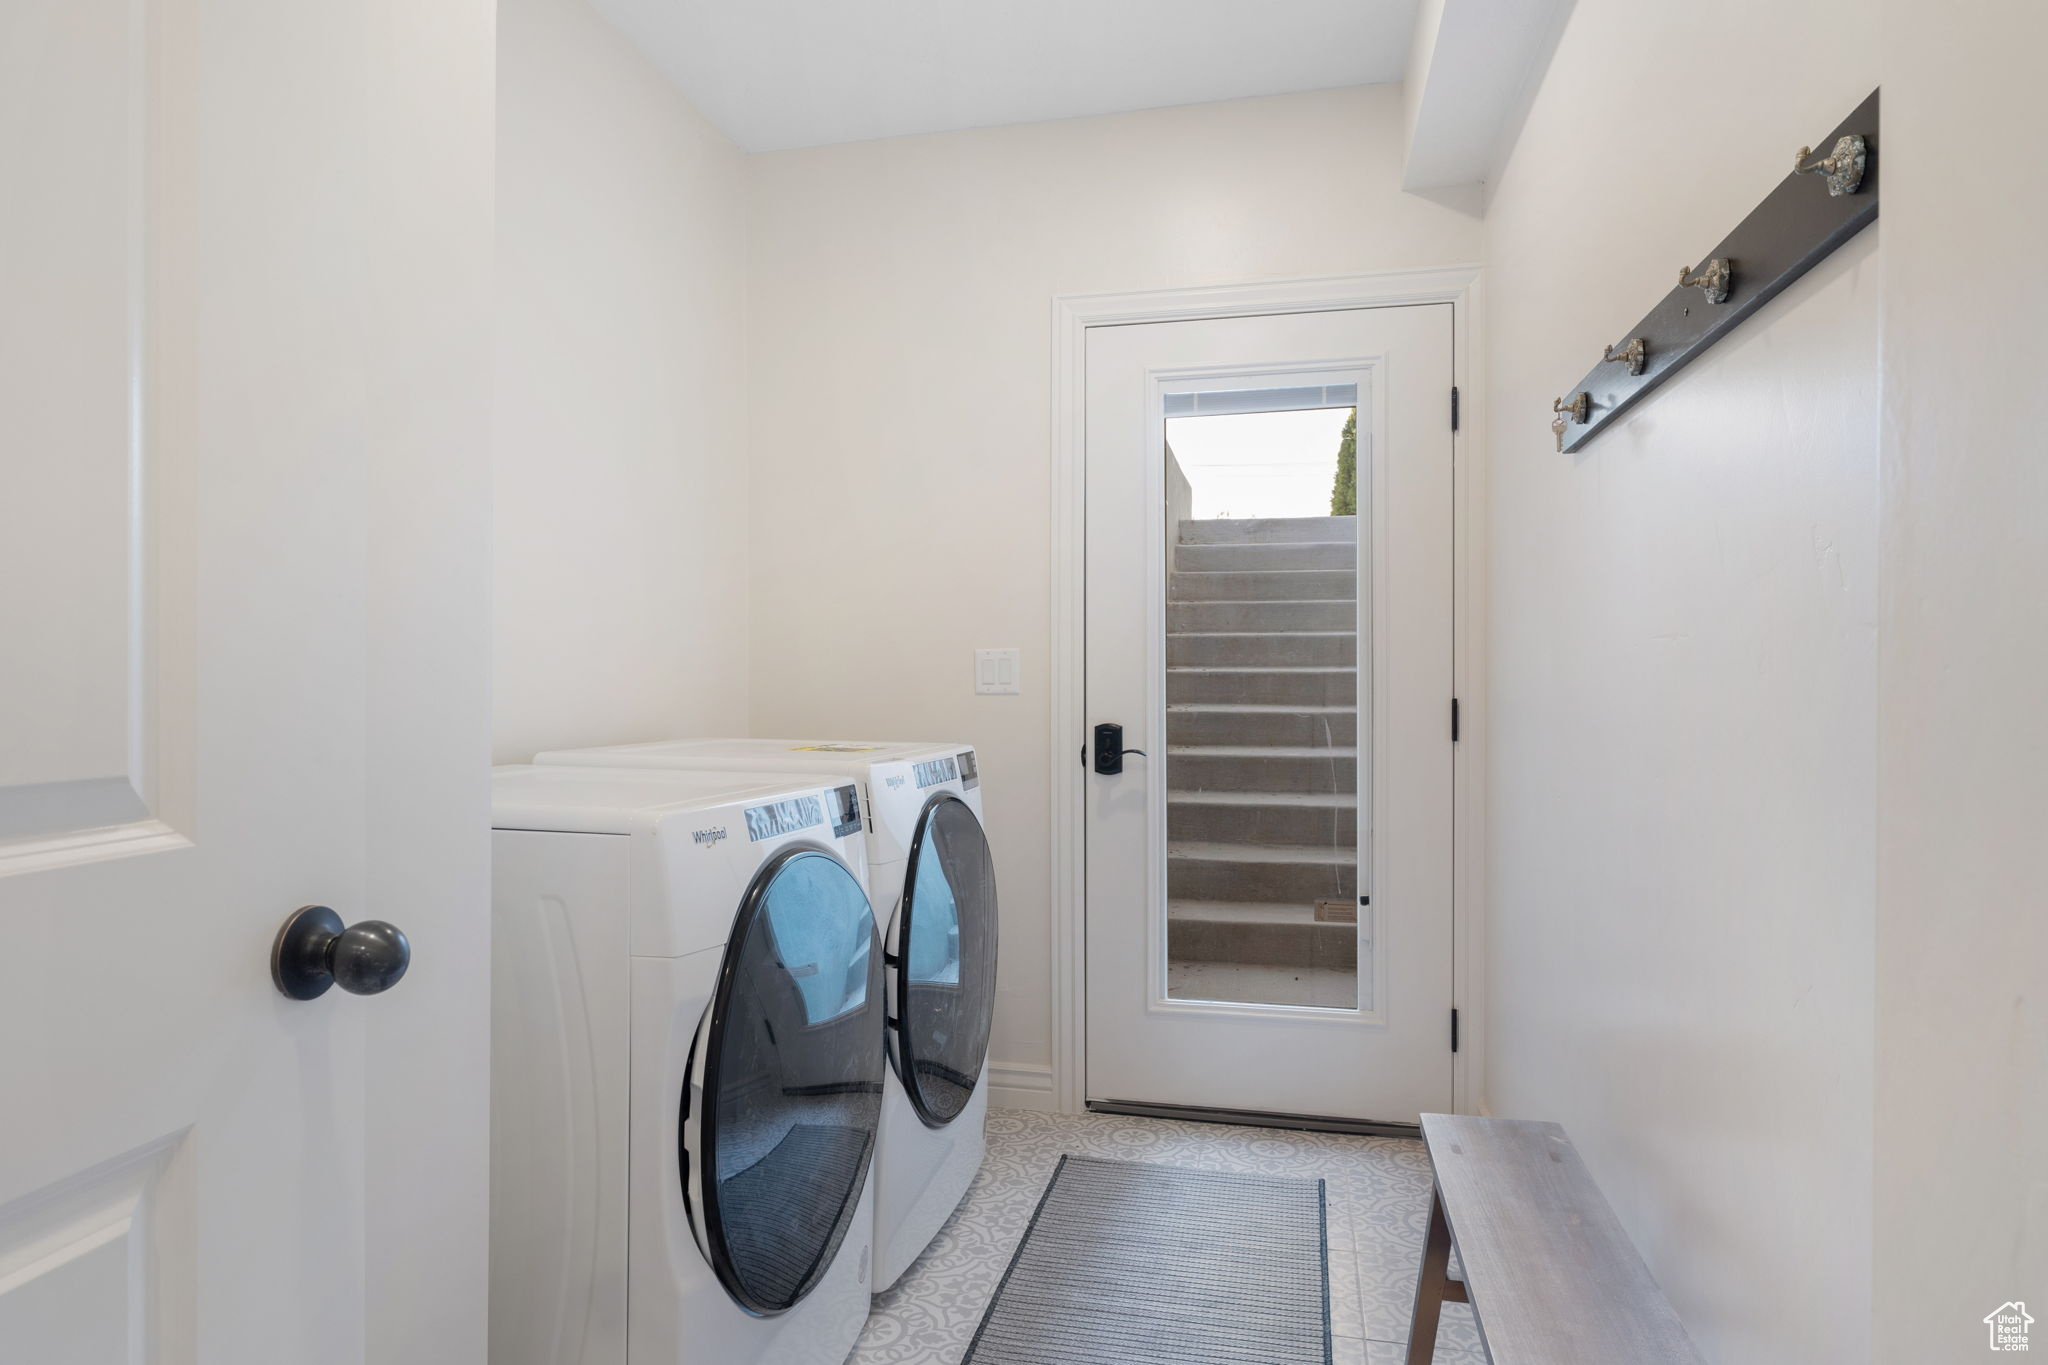 Basement apatment / flex area - Laundry room with washer and dryer